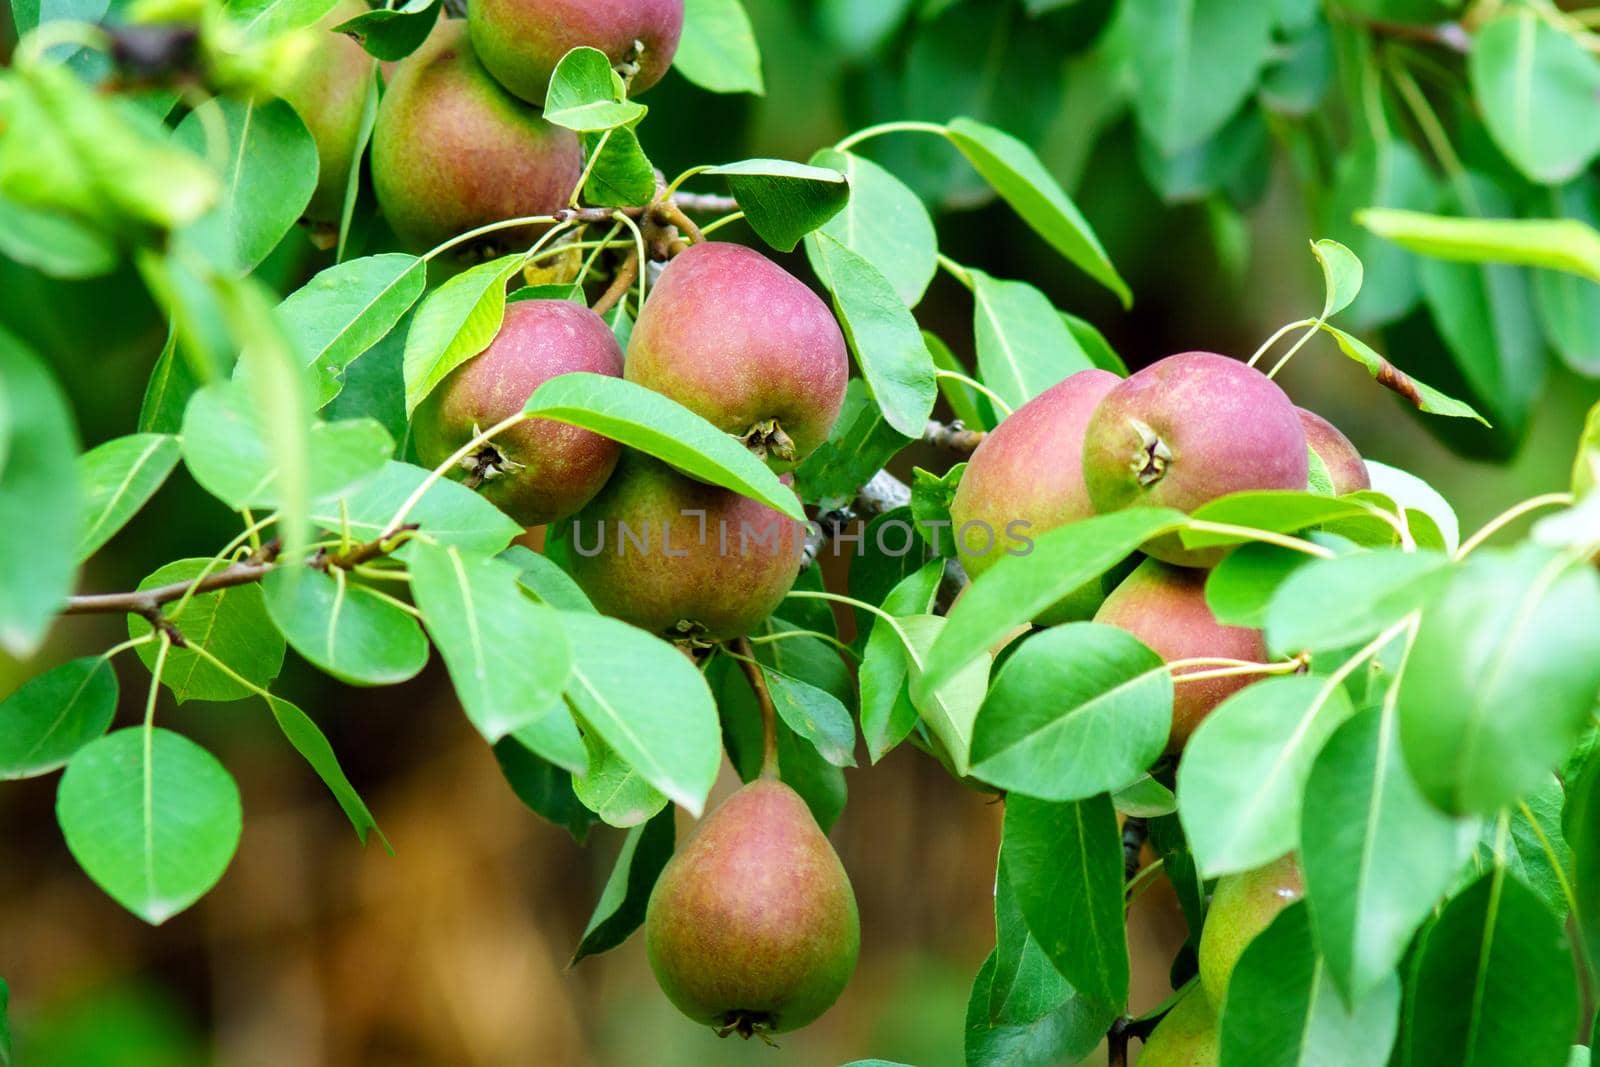 Many juicy ripe pears hanging from a green leaf tree. Healthy organic concept of nature background